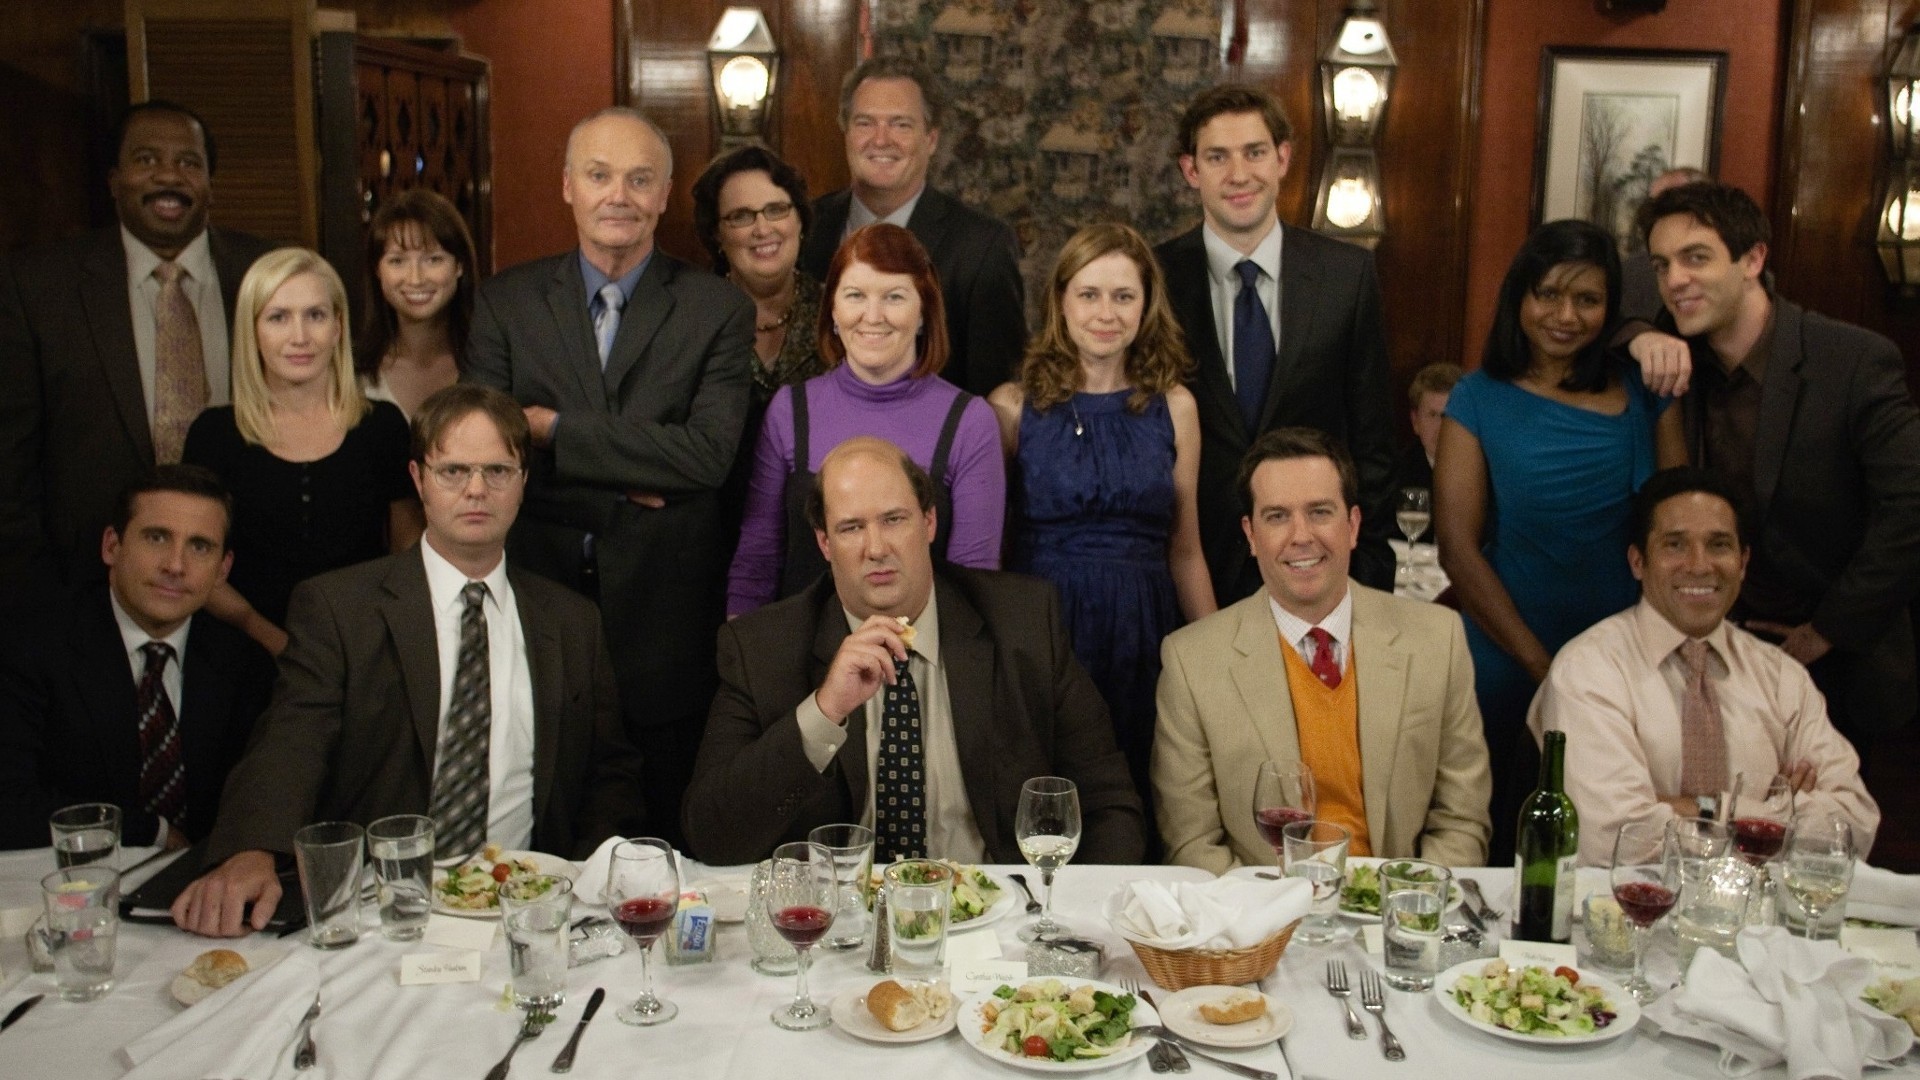 The Office (US) Picture